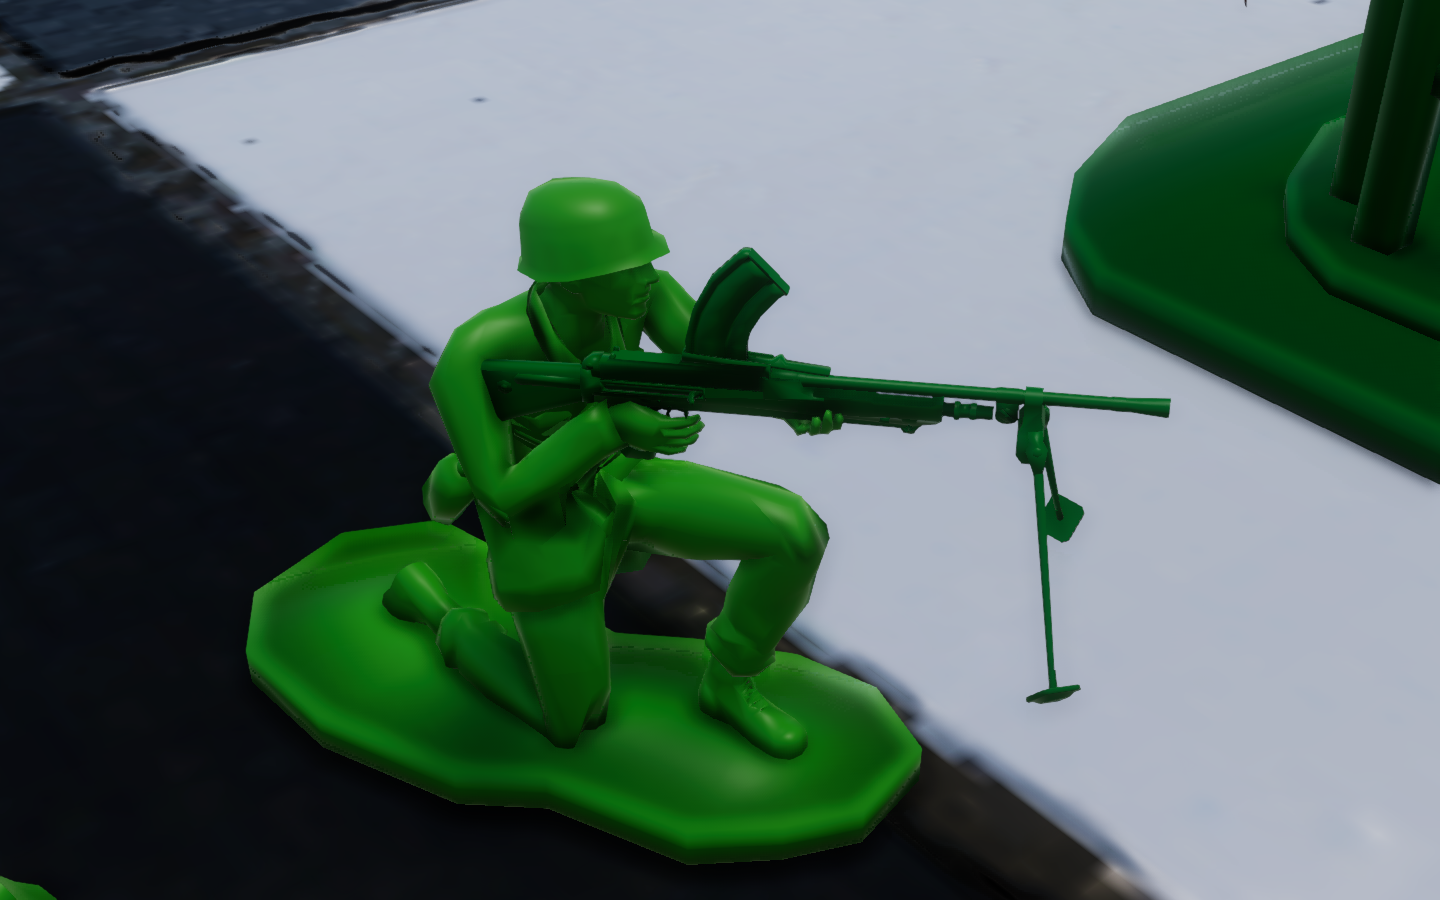 Machine Gunner. Requested by our Discord member tachanka#9551 :)